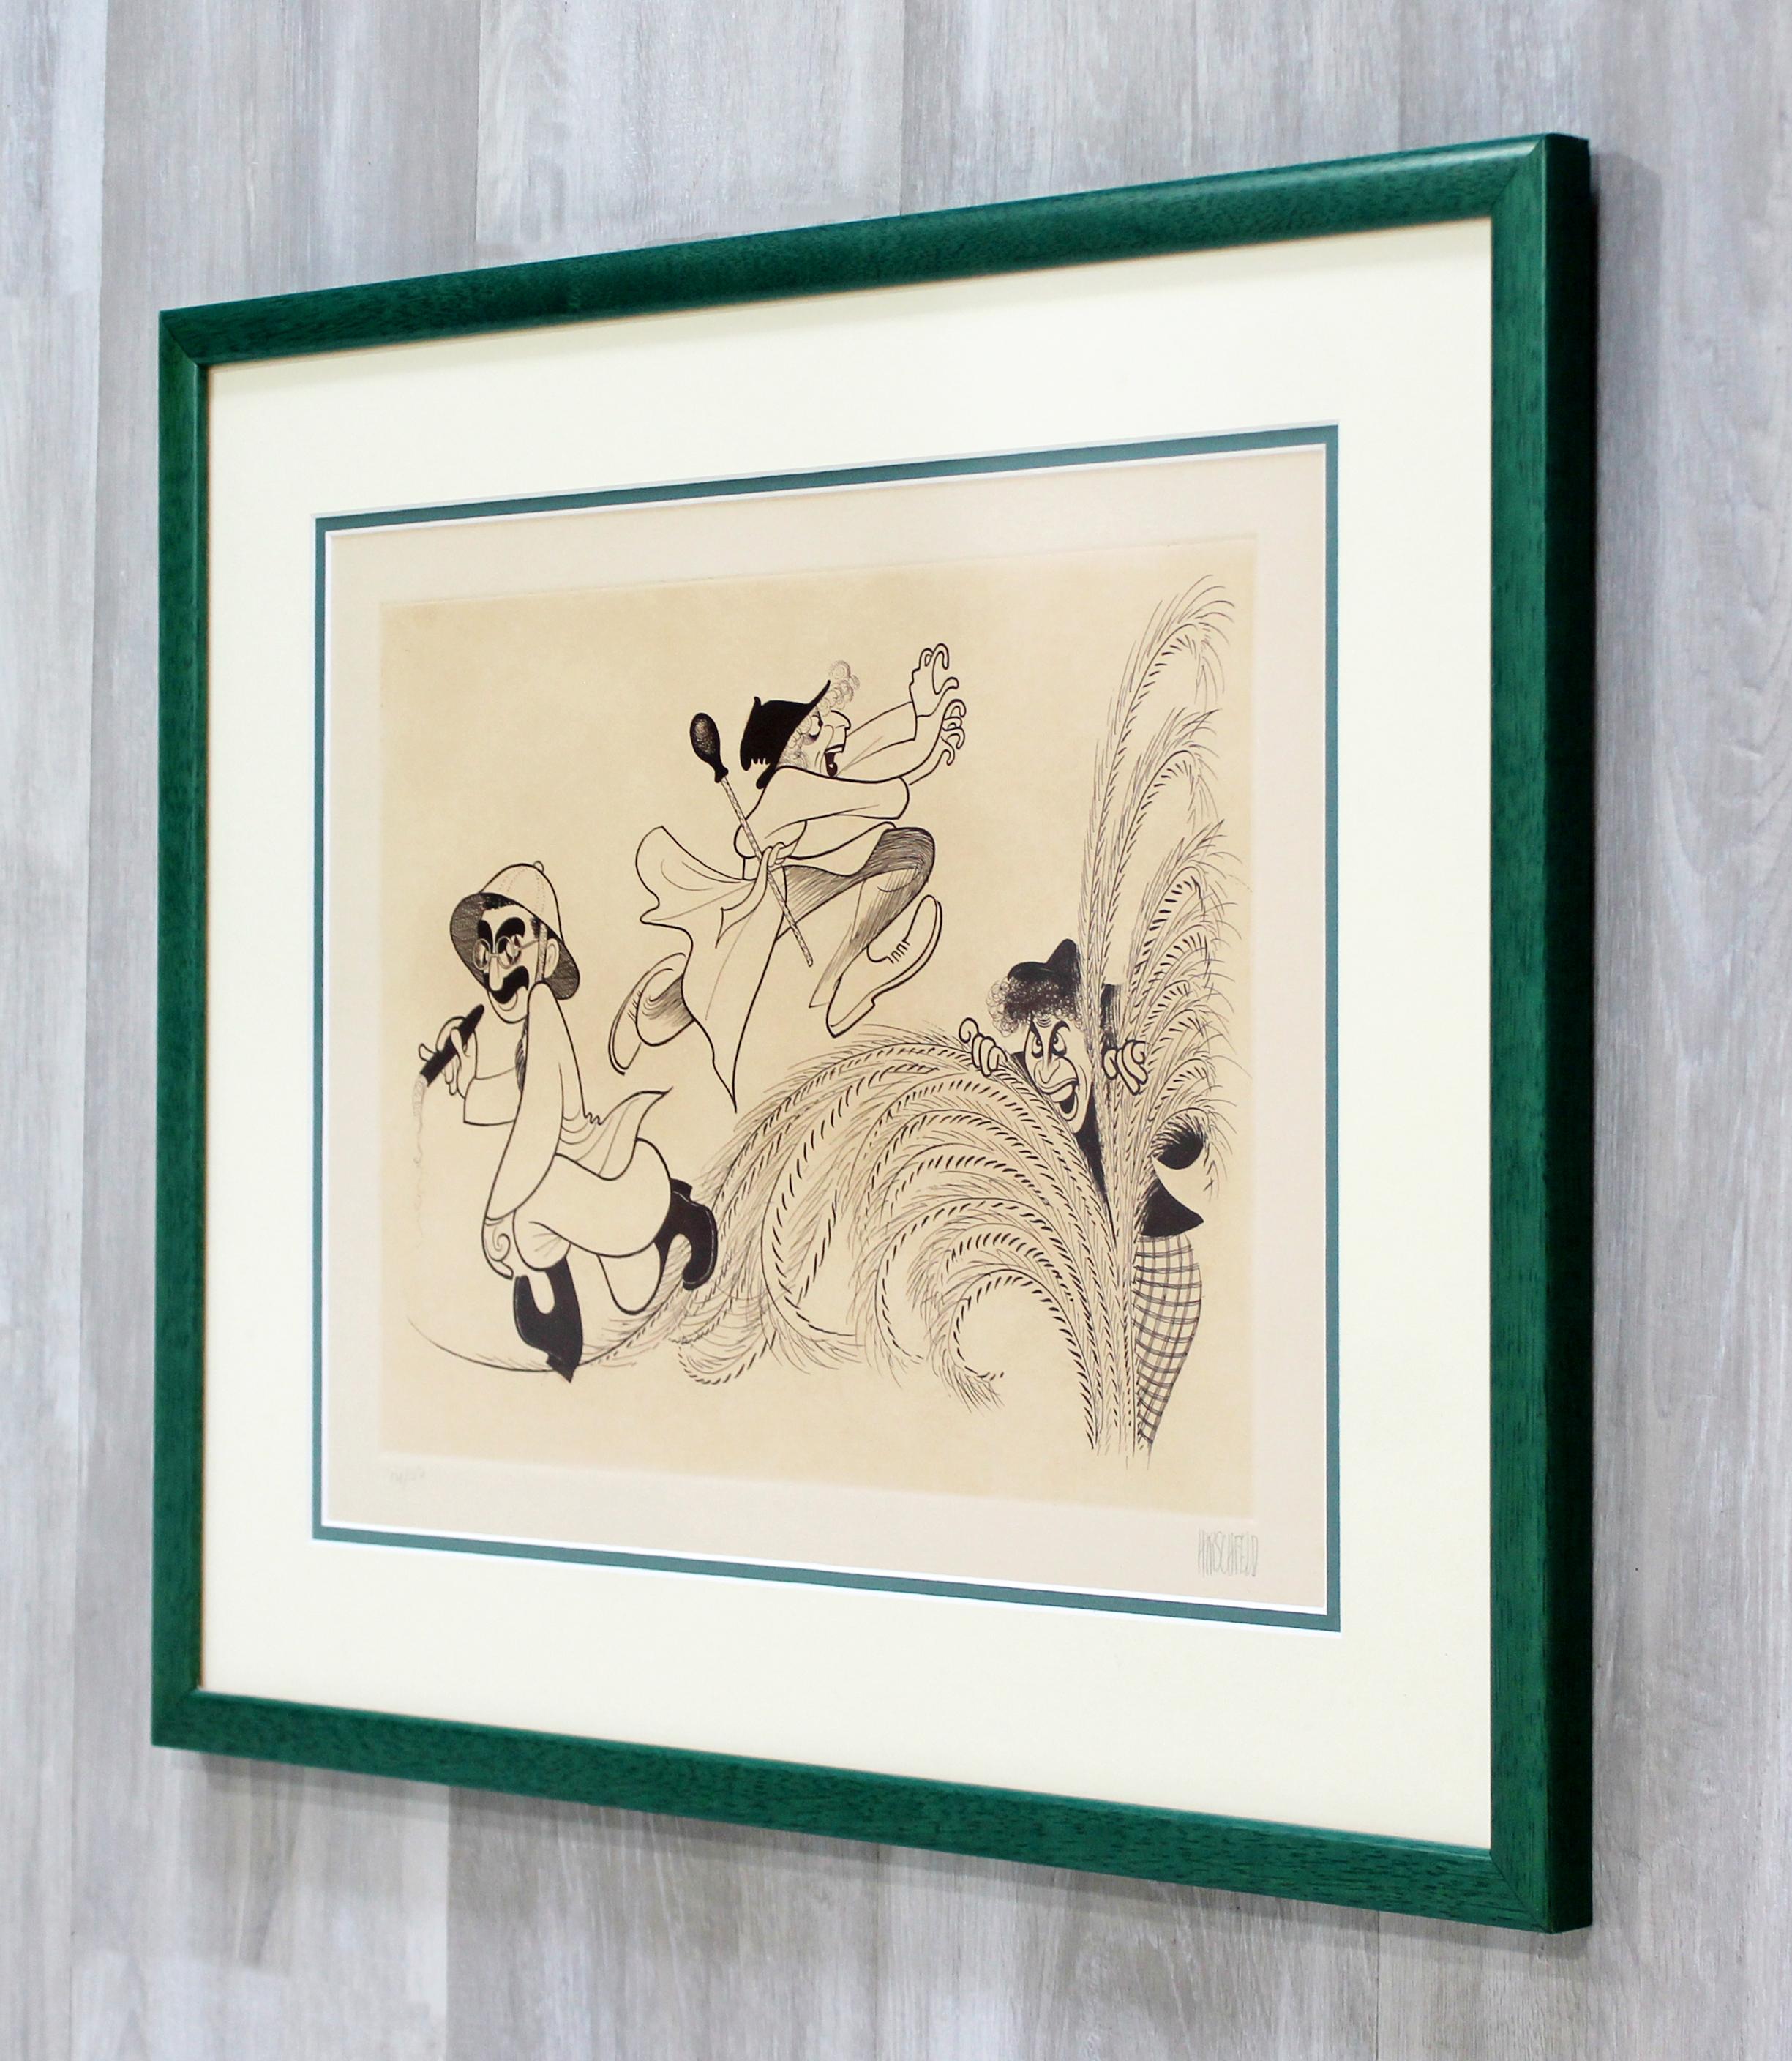 Contemporary Modern Marx Brothers Framed Lithograph Signed Al Hirschfeld 128/150 In Good Condition In Keego Harbor, MI